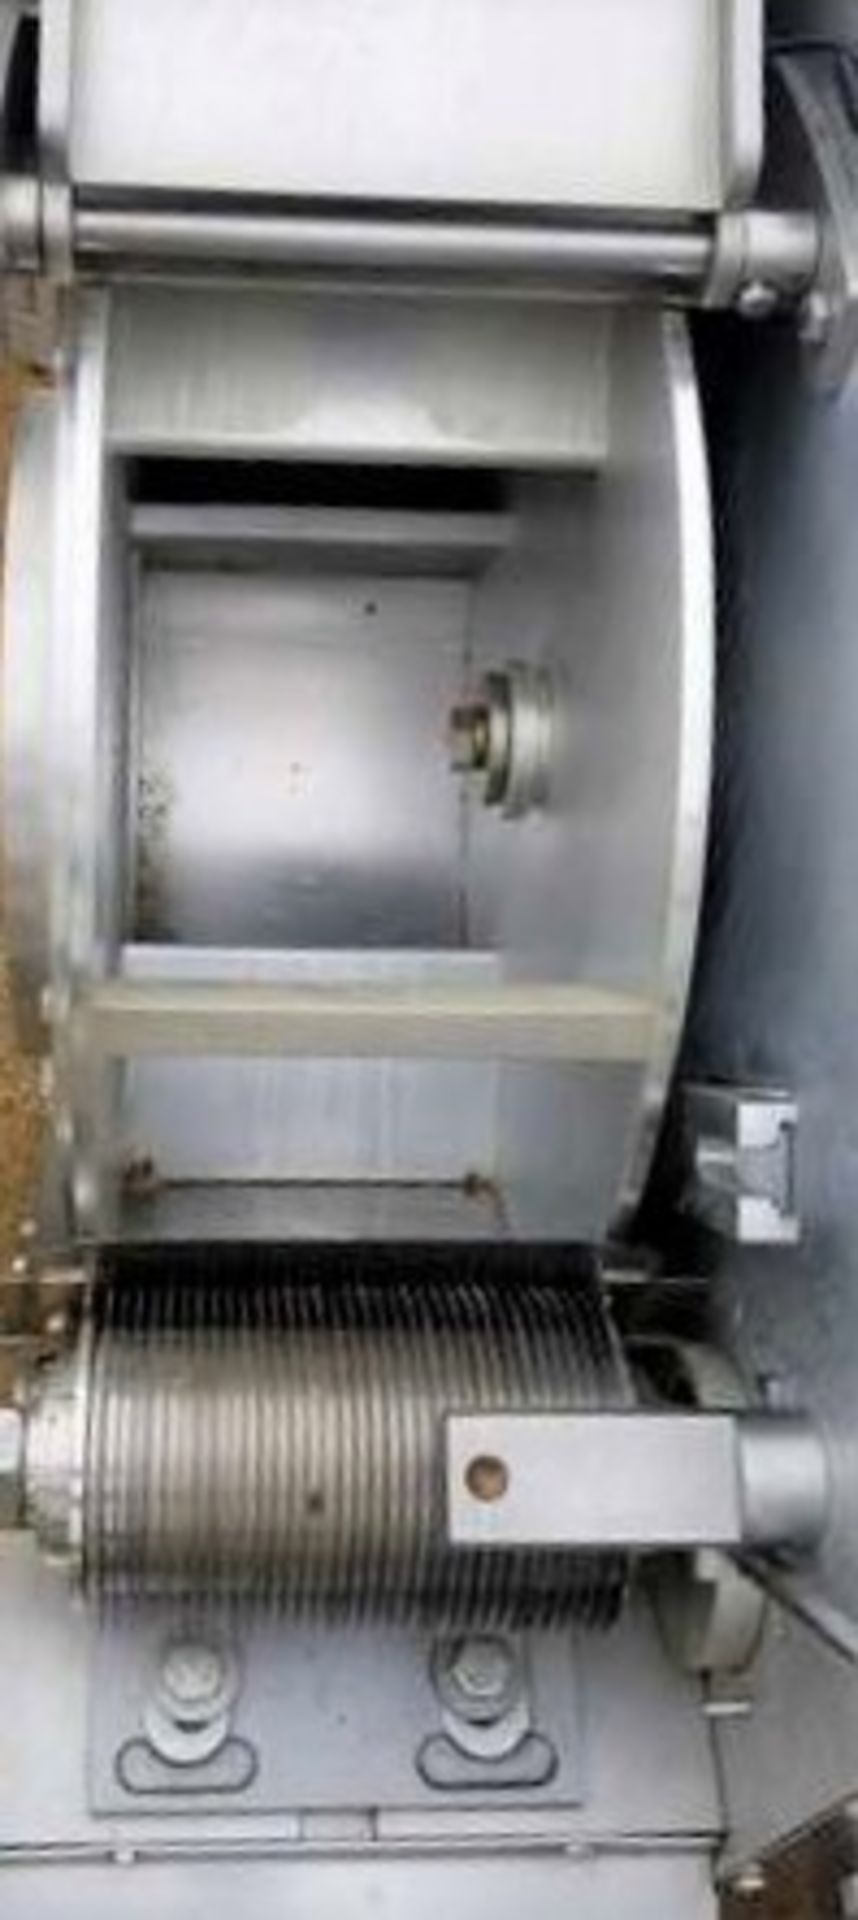 Strip Cutter or Dicer. Chinese built compact unit accepts chunk boneless meat into the front - Image 5 of 6